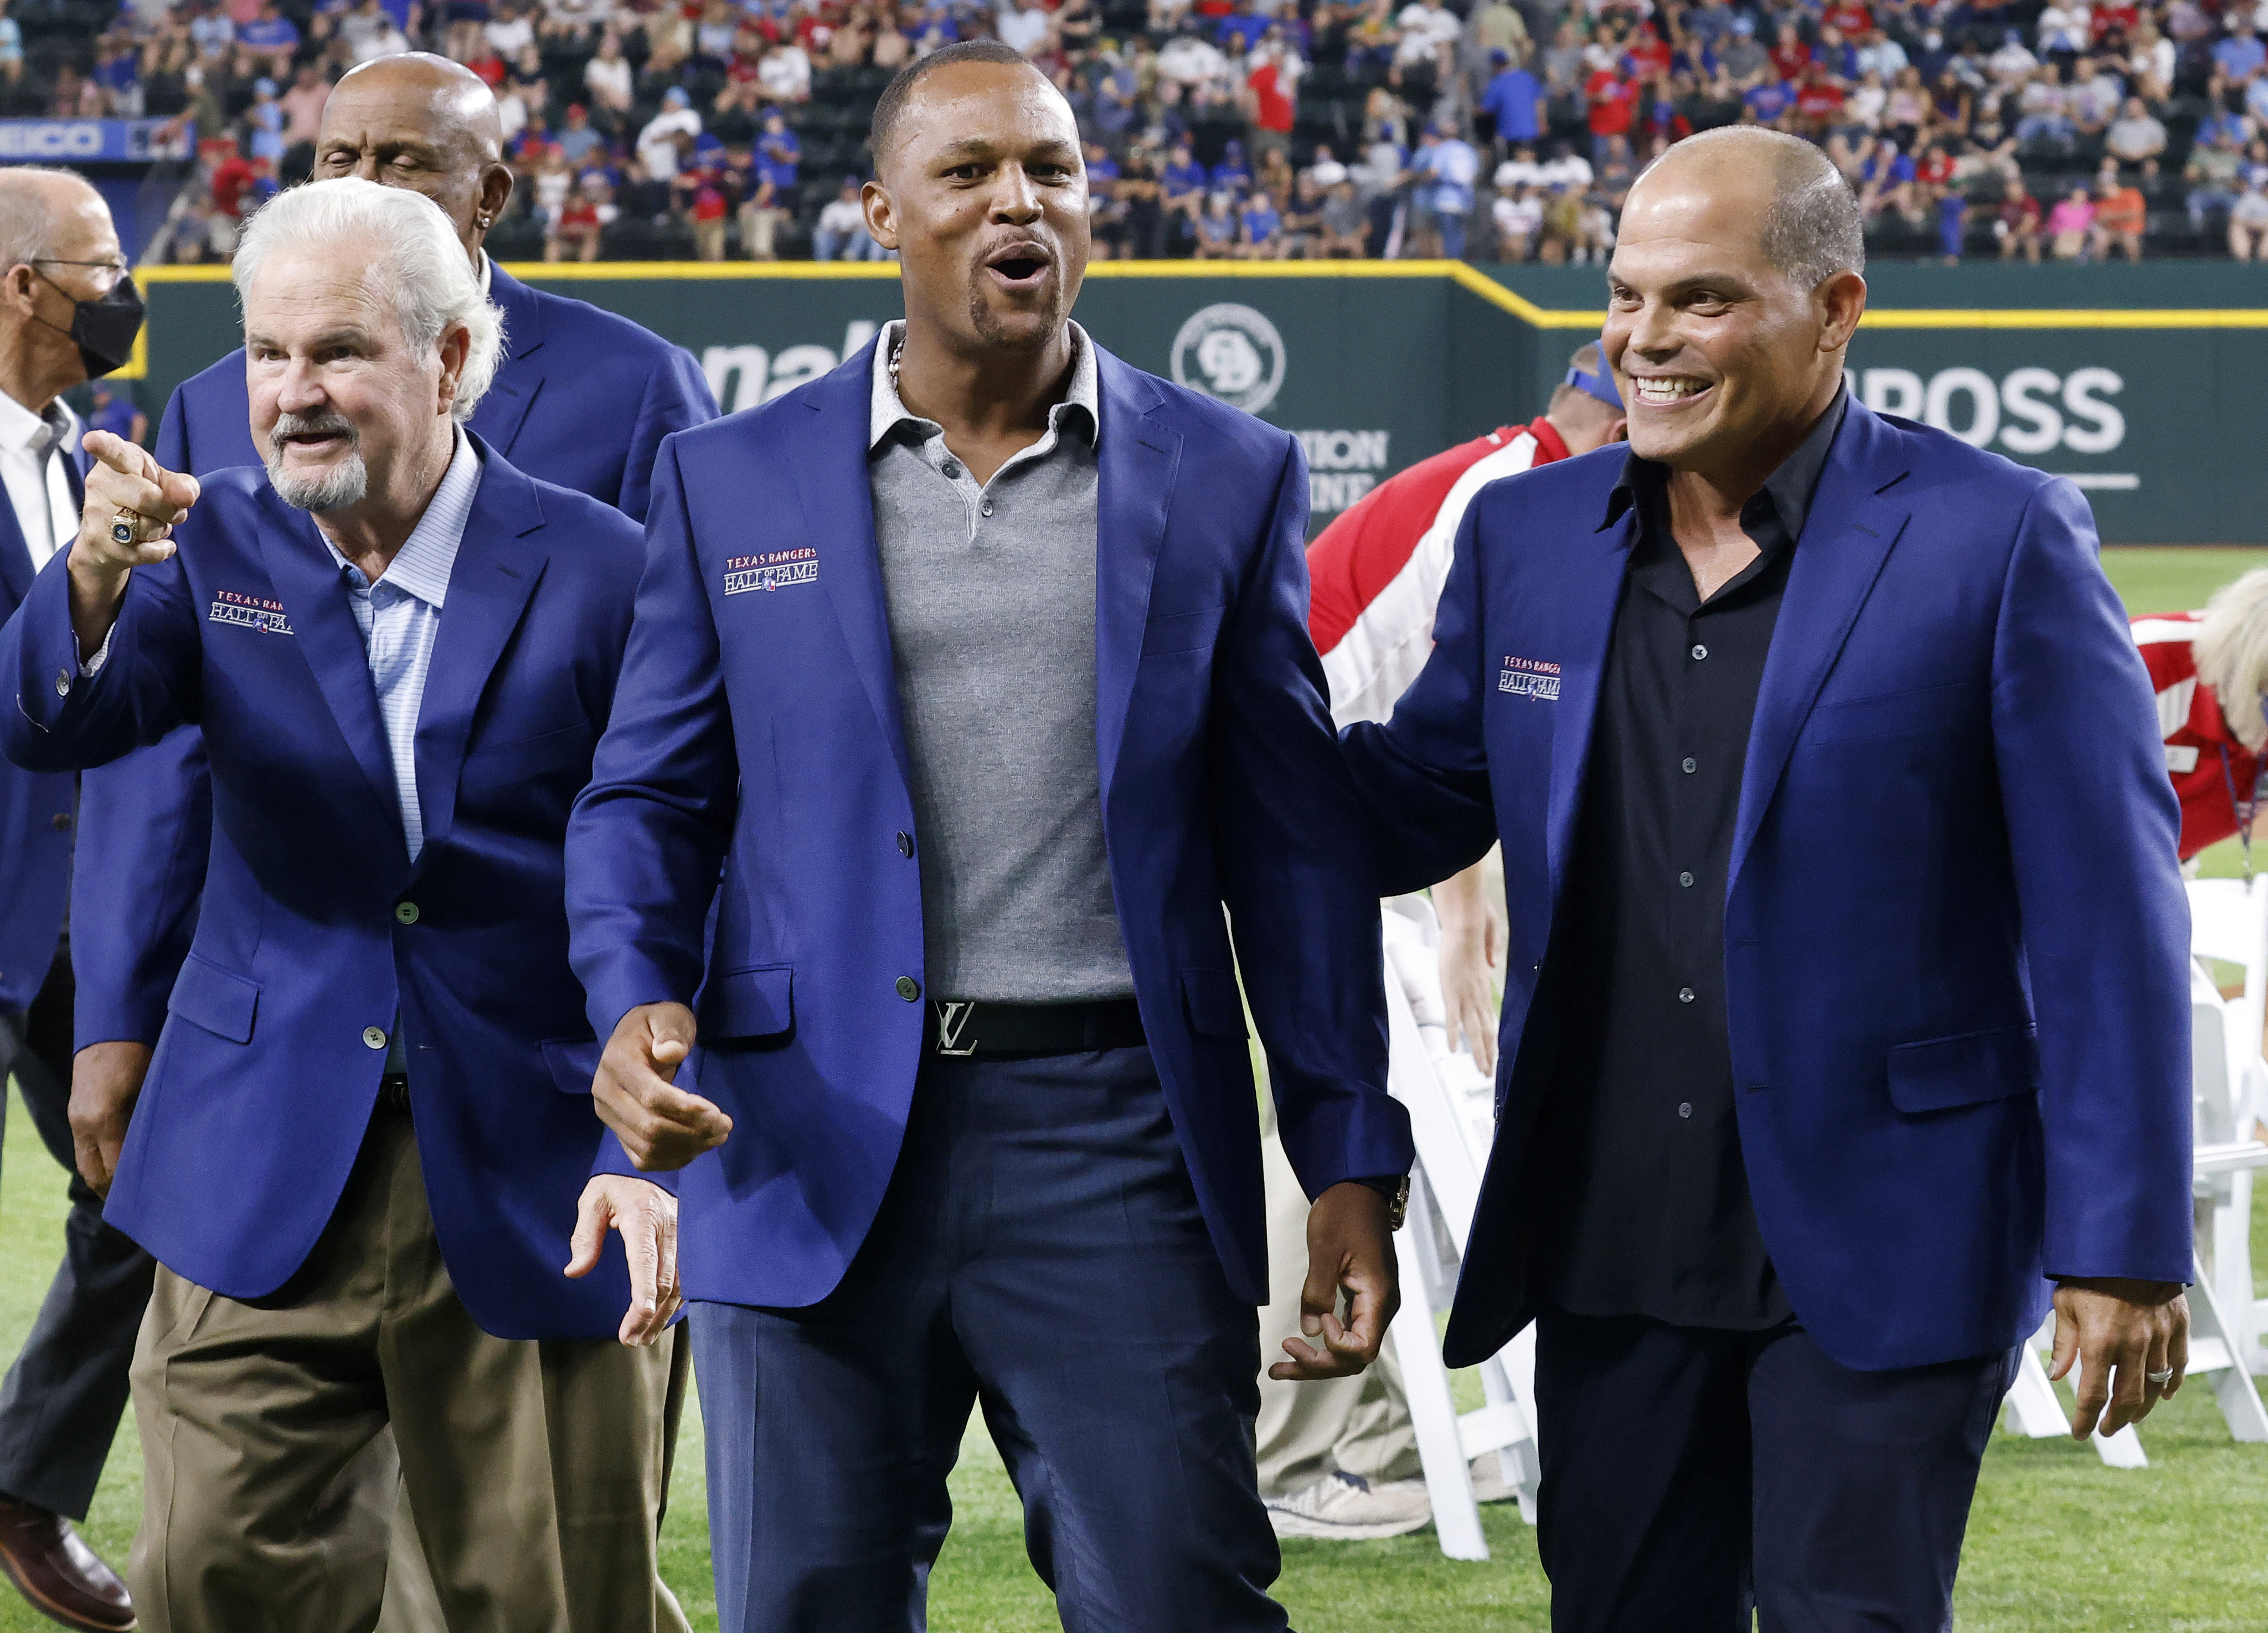 Beltre inducted into Rangers Hall of Fame with PA man Morgan,  KSEE24